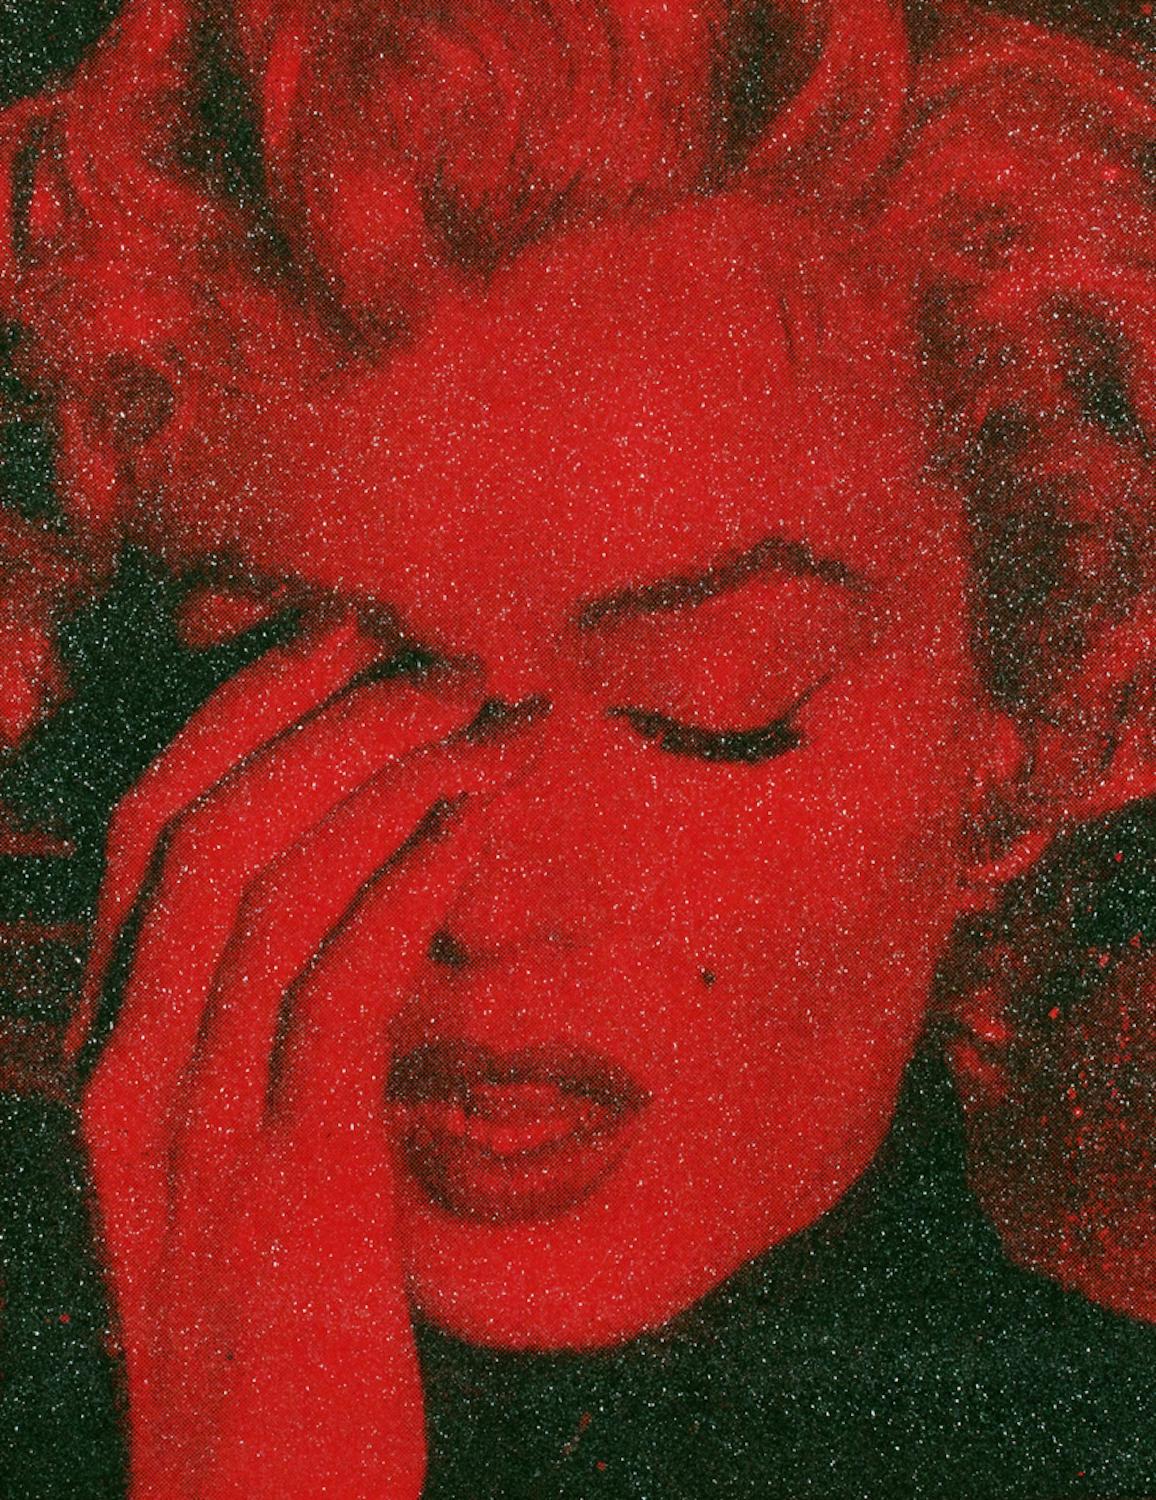 MARILYN CRYING - CALIFORNIA Blind Red Ltd Ed 3/4 - Diamond Dust on Linen/Framed - Mixed Media Art by Russell Young